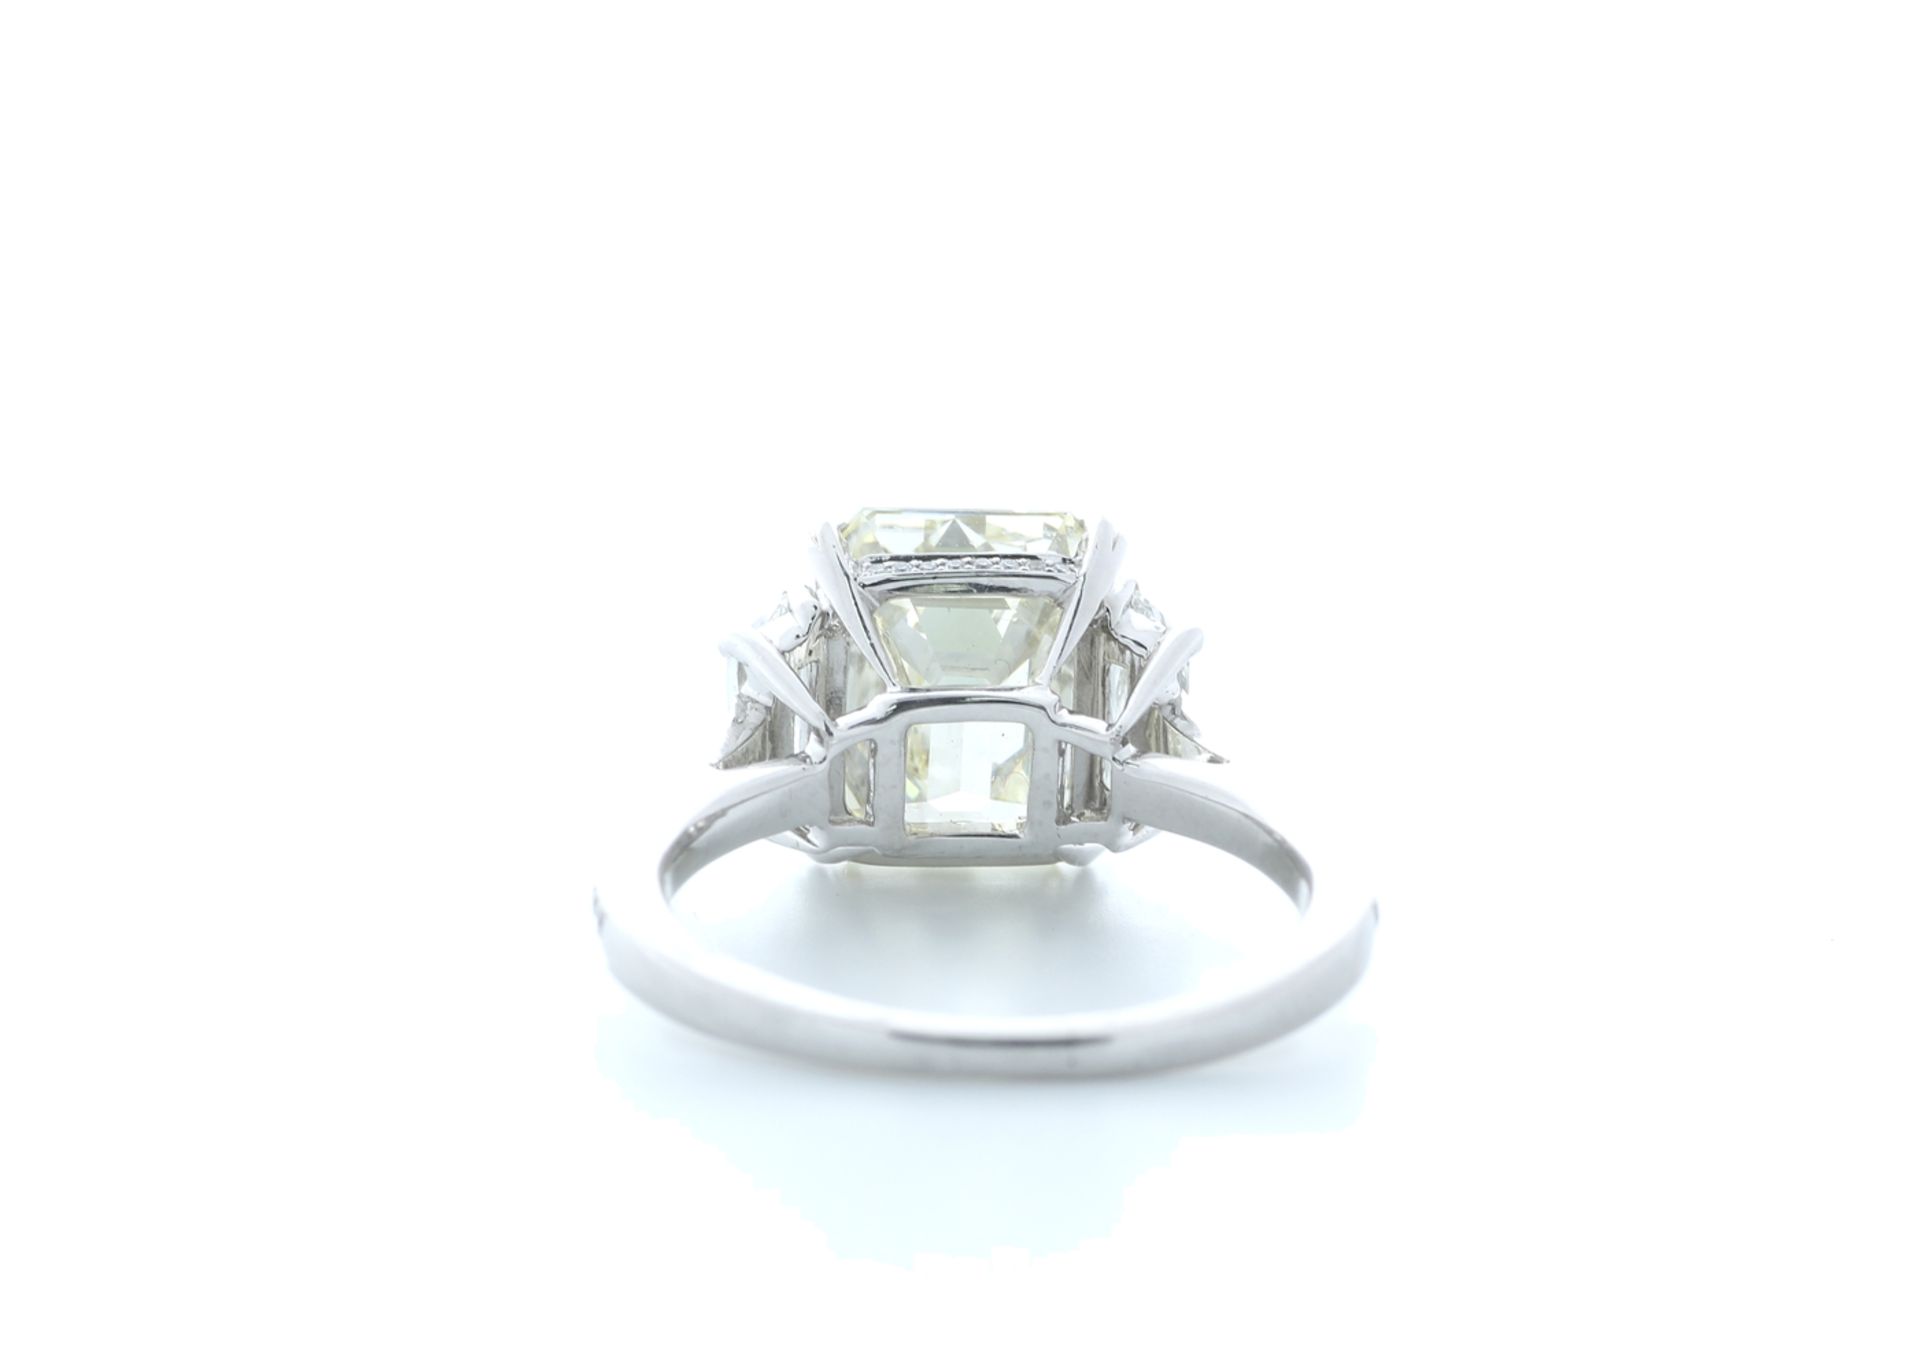 18ct White Gold Emerald Cut Diamond Ring 5.31 (4.56) Carats - Valued by IDI £190,000.00 - 18ct White - Image 3 of 5